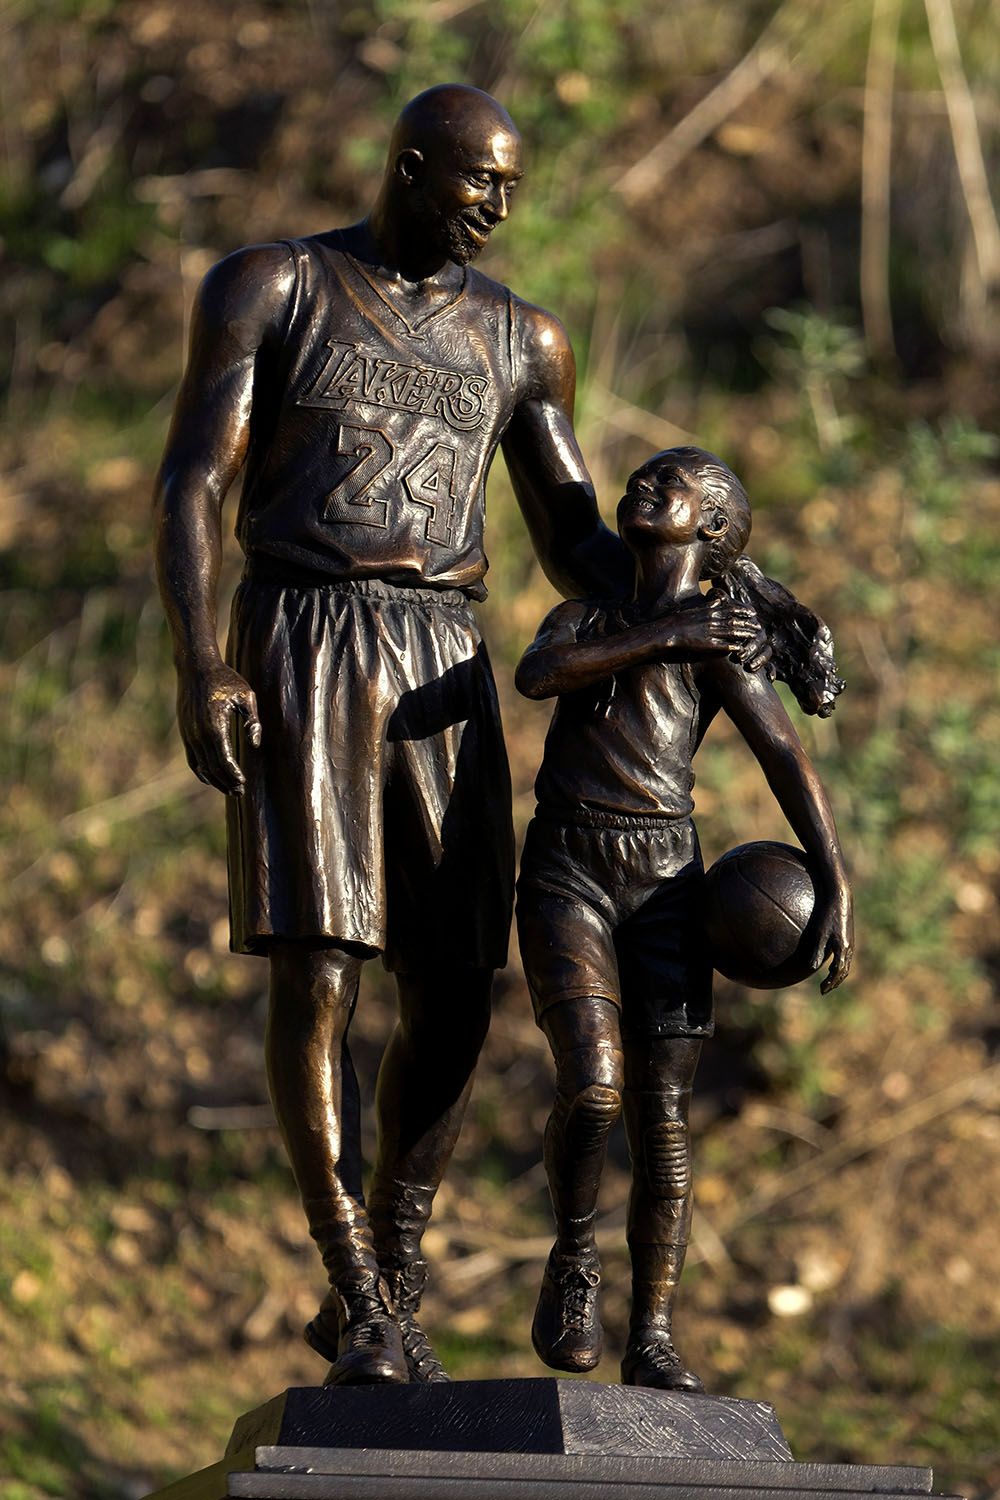 Artist Dan Medina created a bronze sculpture honoring Kobe and Gianna at Calabas County, site of their fateful helicopter crash.